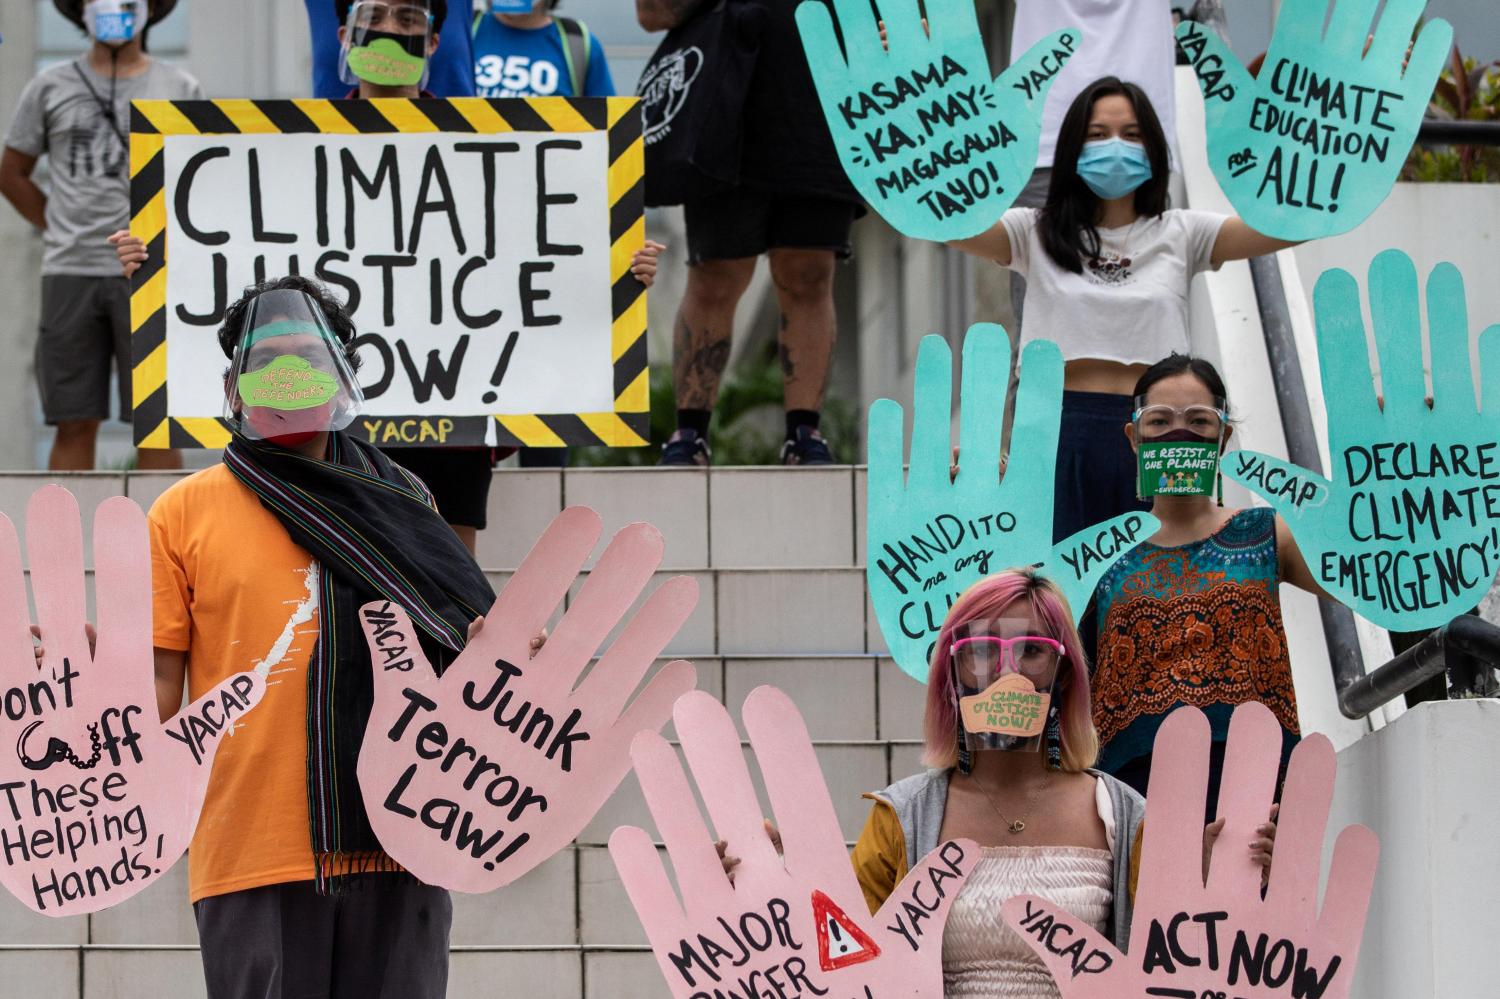 Filipino climate activists hold placards calling for climate action in participation with the global climate change protests, in Quezon City, Metro Manila, Philippines, September 25, 2020. REUTERS/Eloisa Lopez